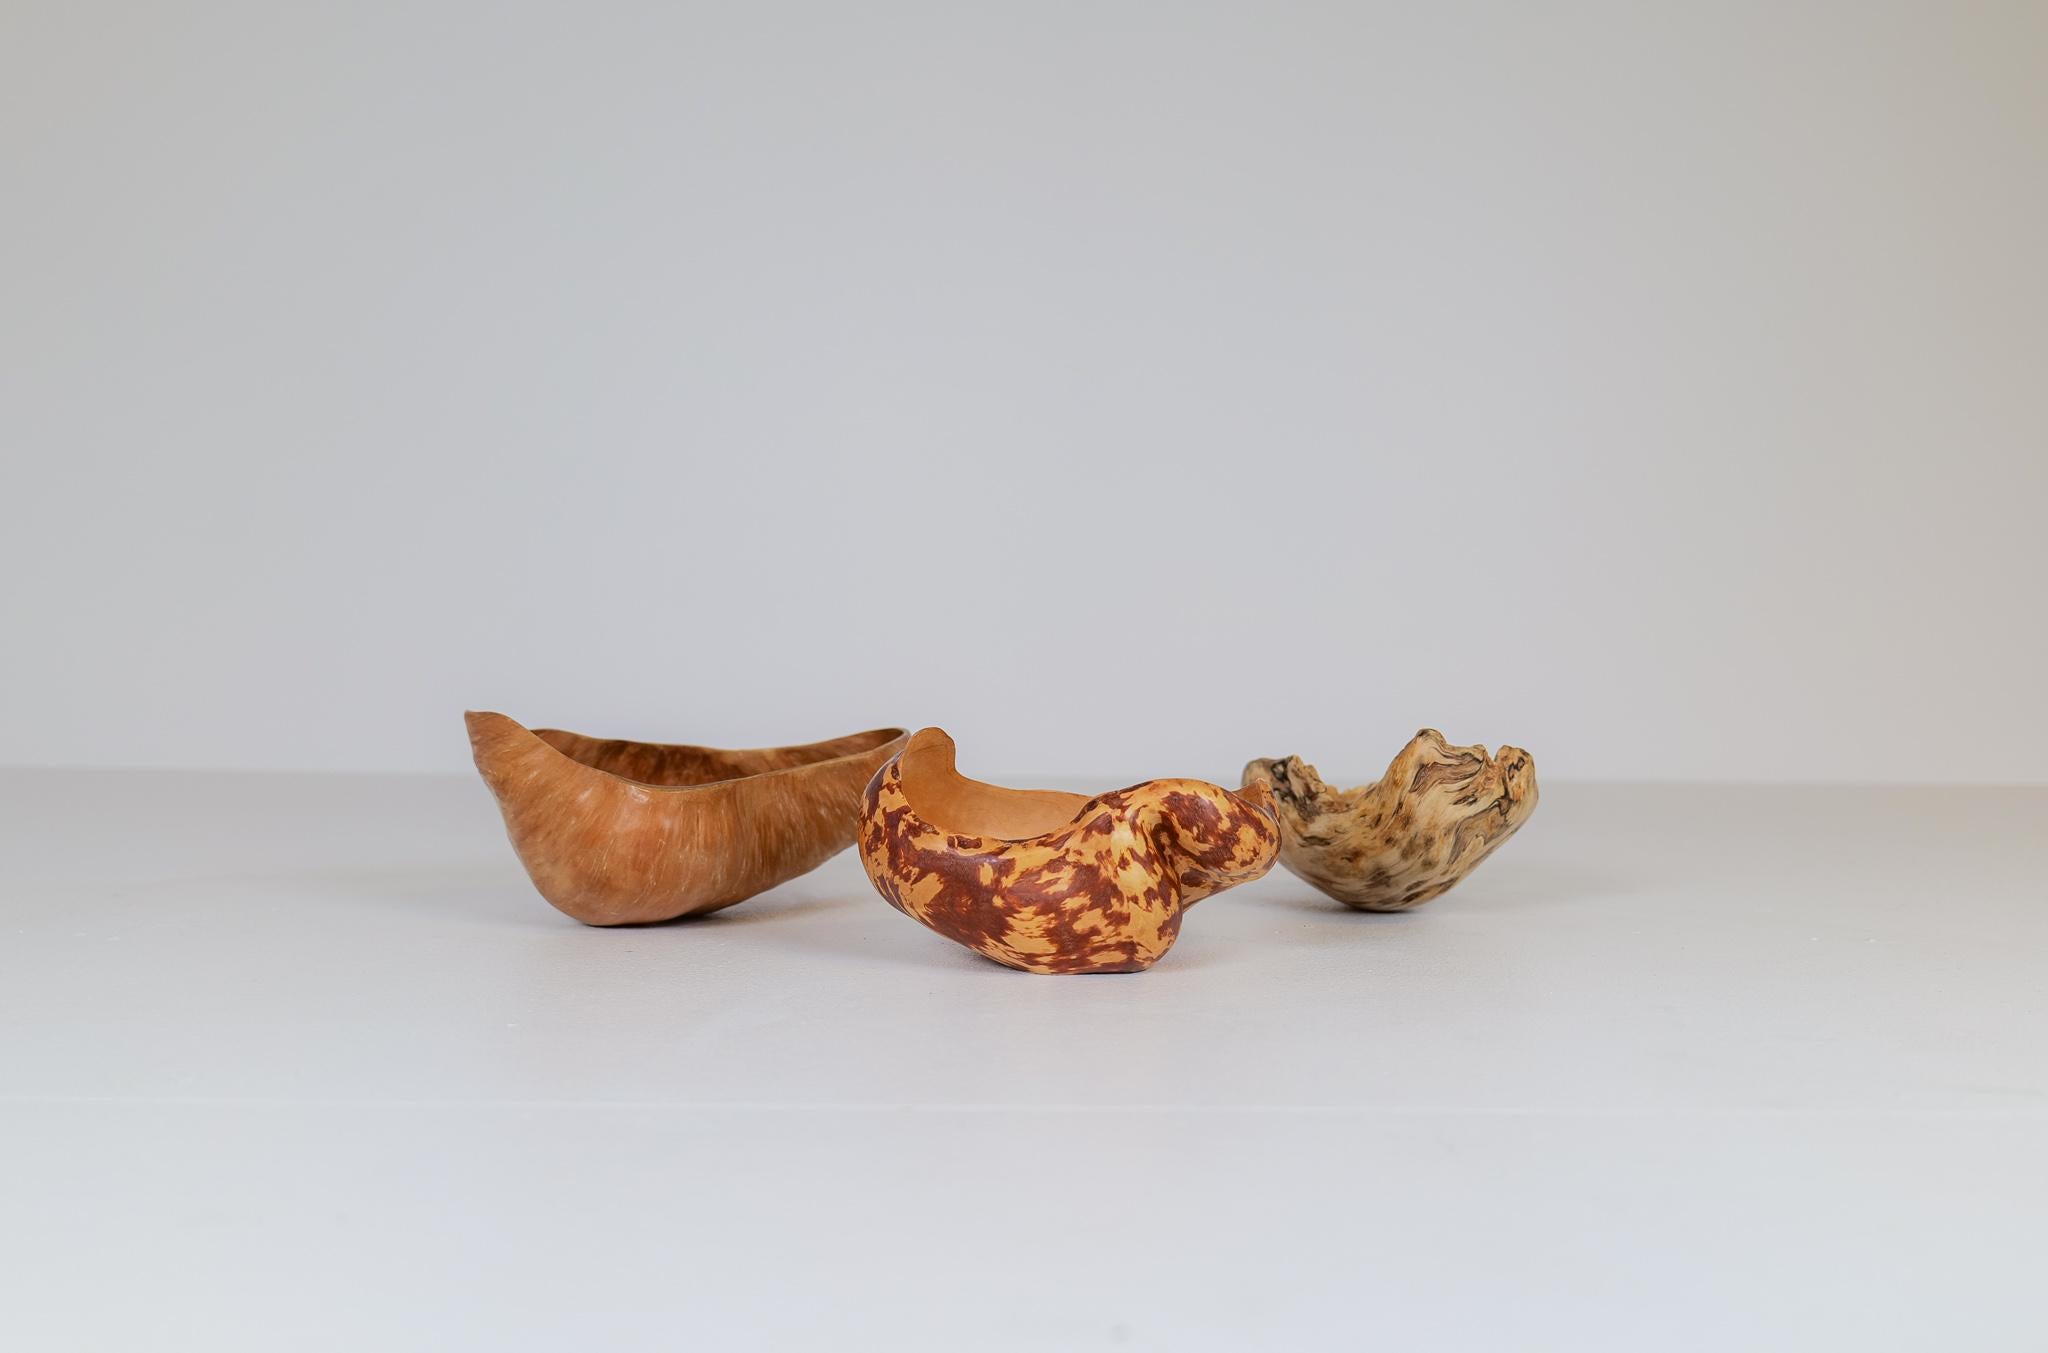 These burl bowls made in Sweden with precision handcraft gives a nice edition to any living room with intention to give an organic simple, but jet complex look. The signs of the wood structure and life are clearly visible. 

Good vintage